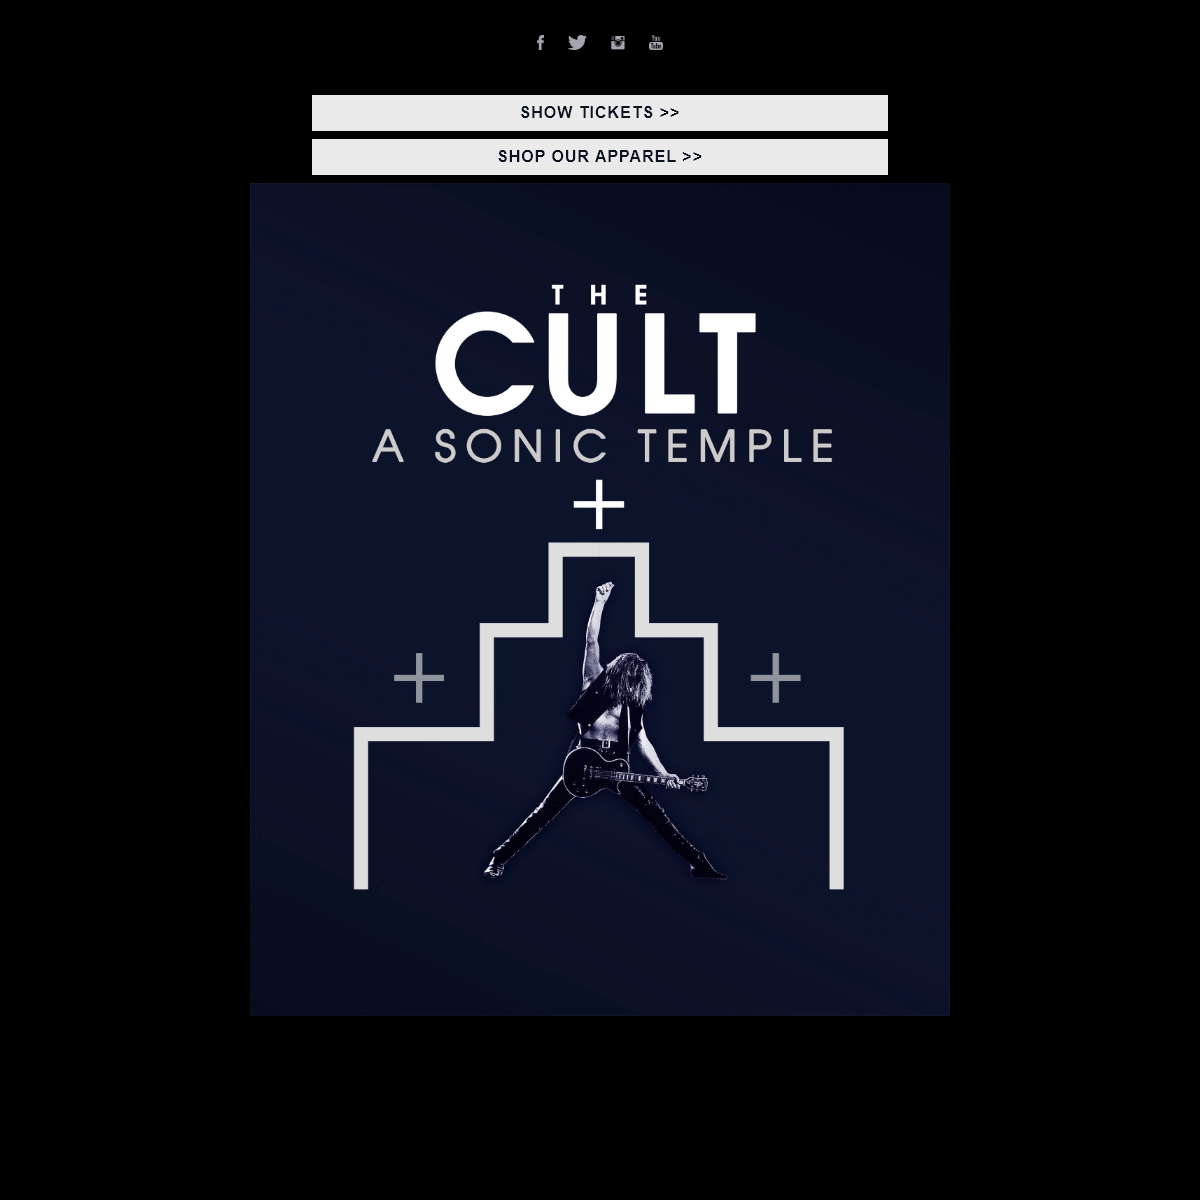 A complete backup of thecult.us